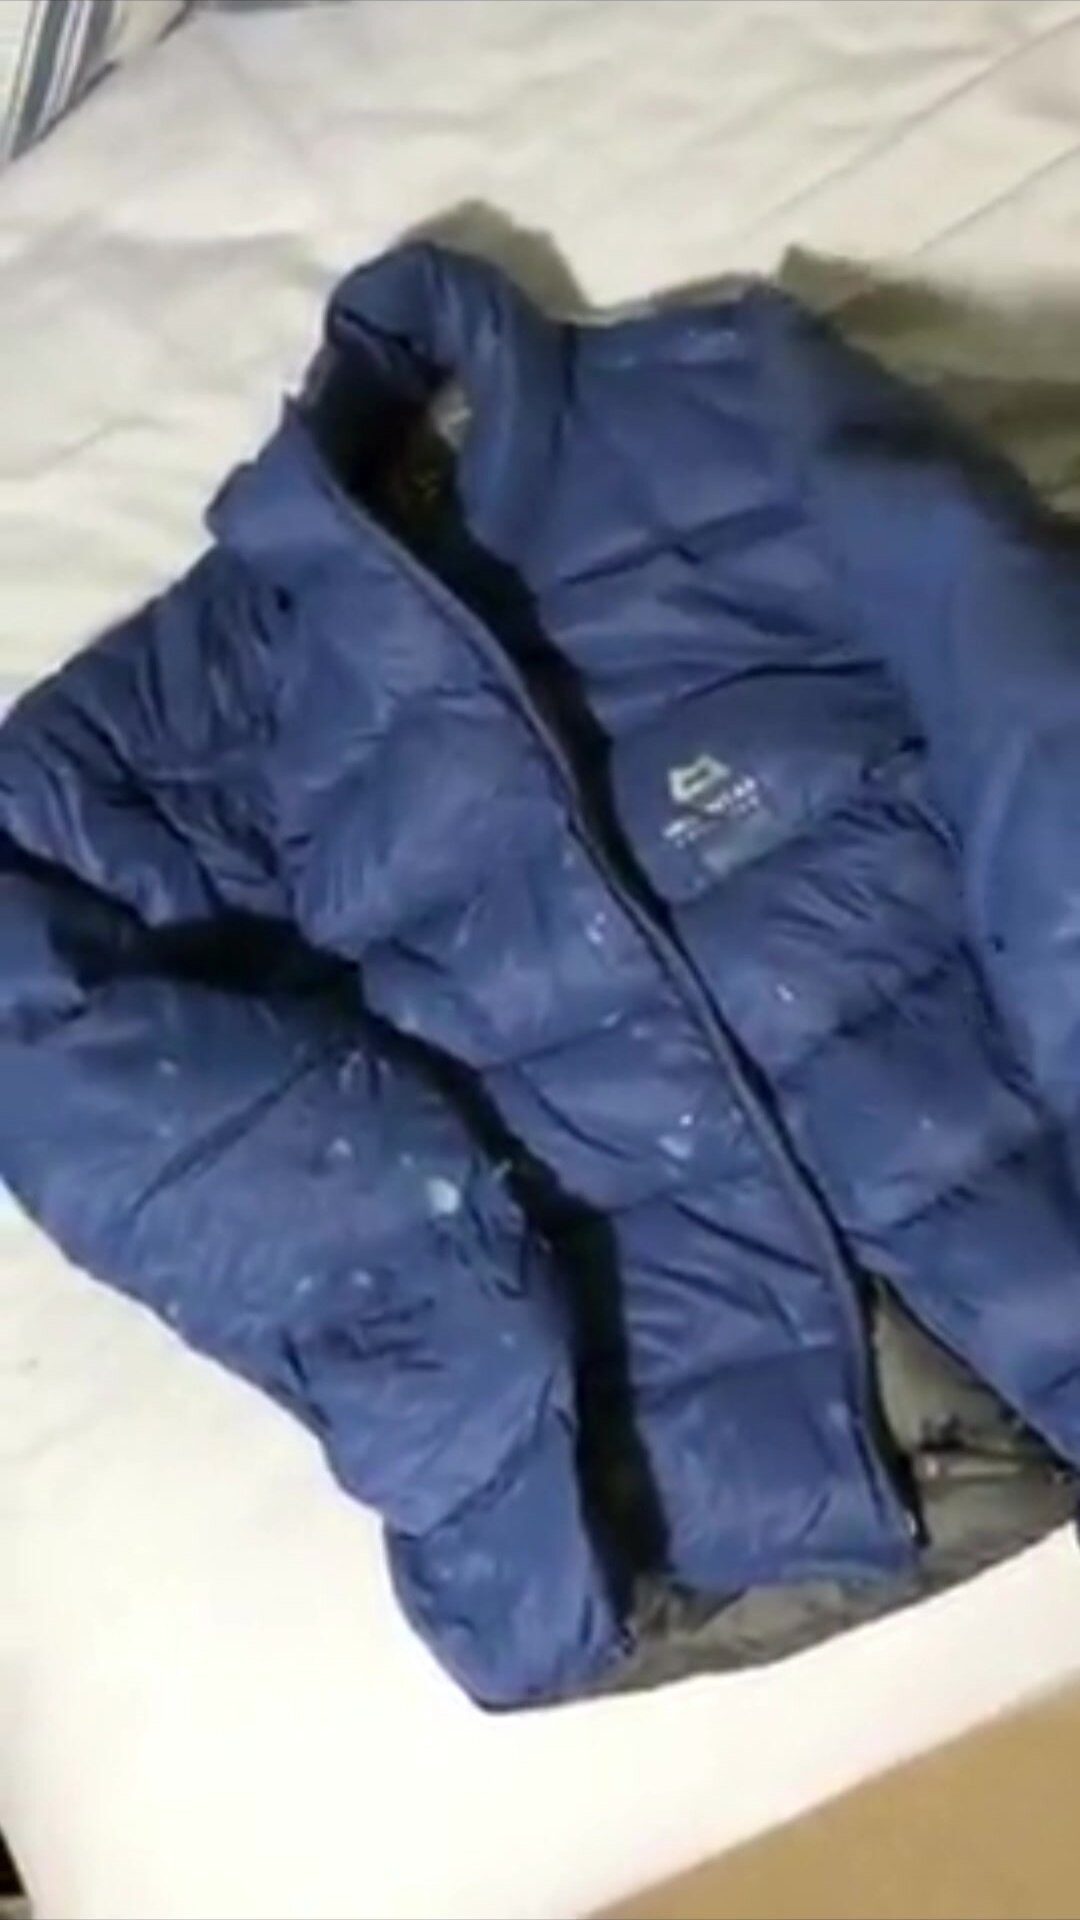 Guy Shoots A Load On His Mountain Equipment Puffer